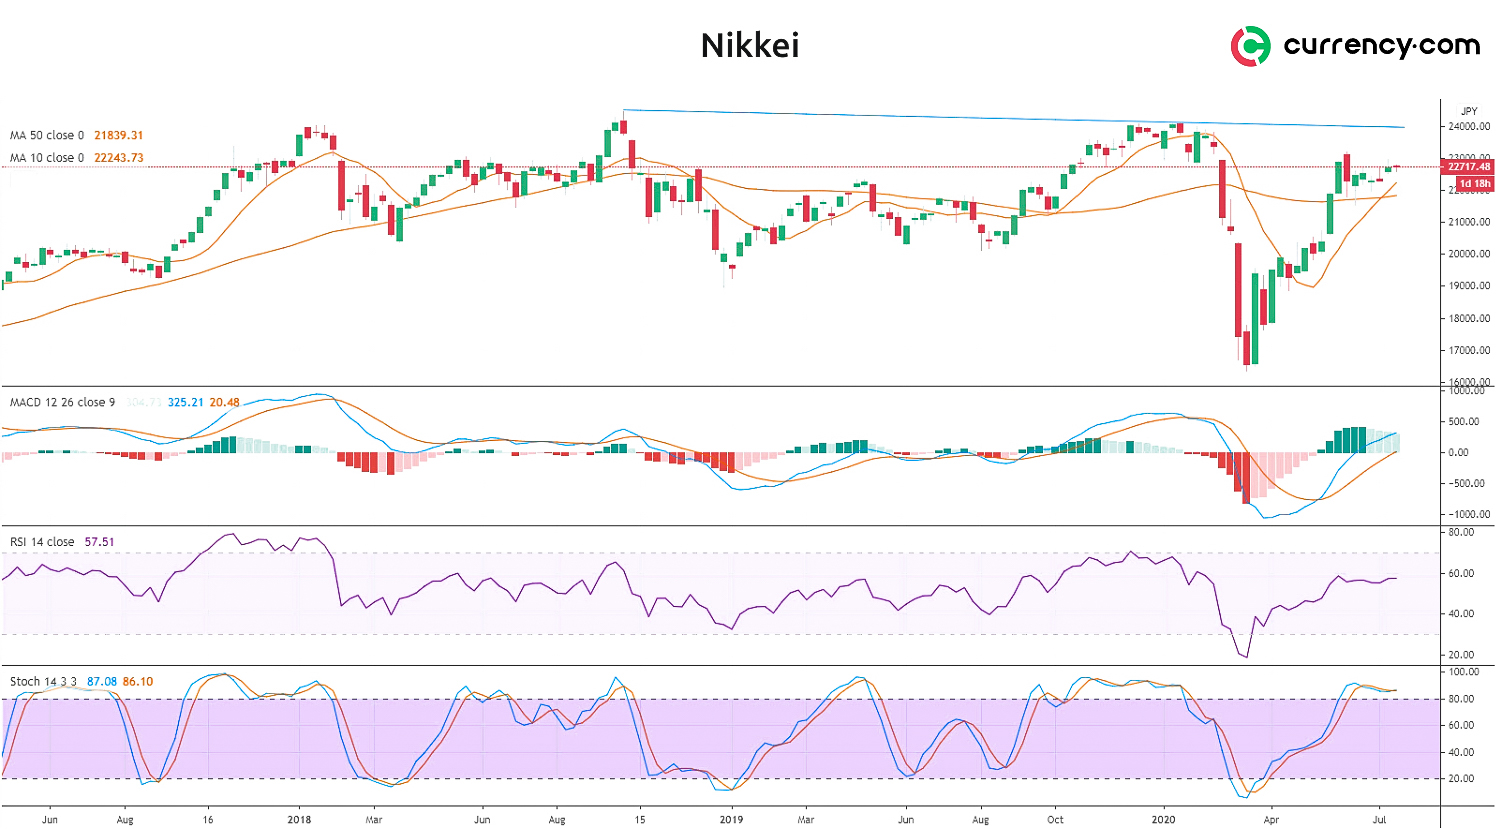 Nikkei 225 technical analysis: the upward trend is likely to continue ...